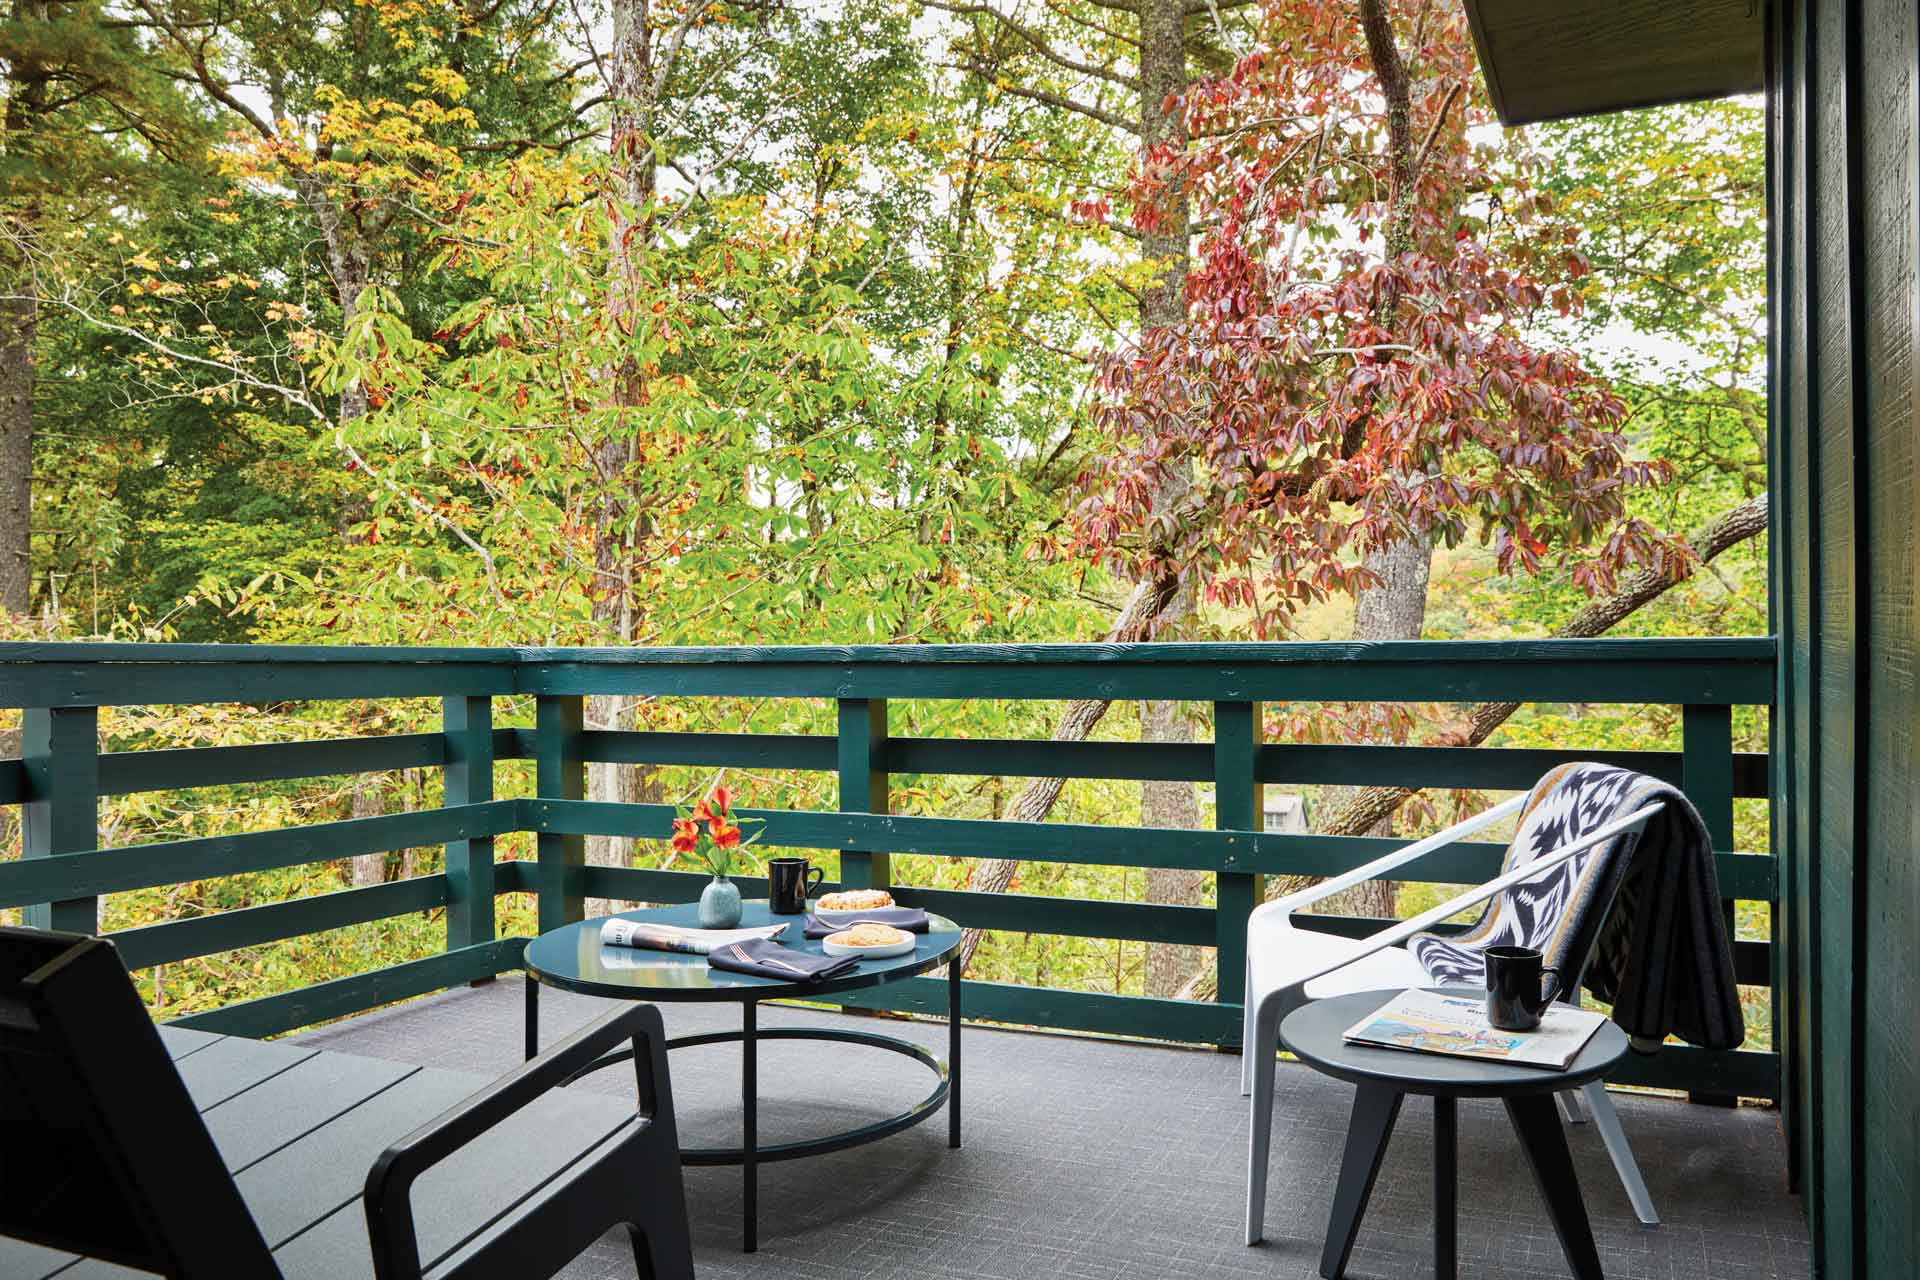 A private deck is set for breakfast at the Skyline Lodge